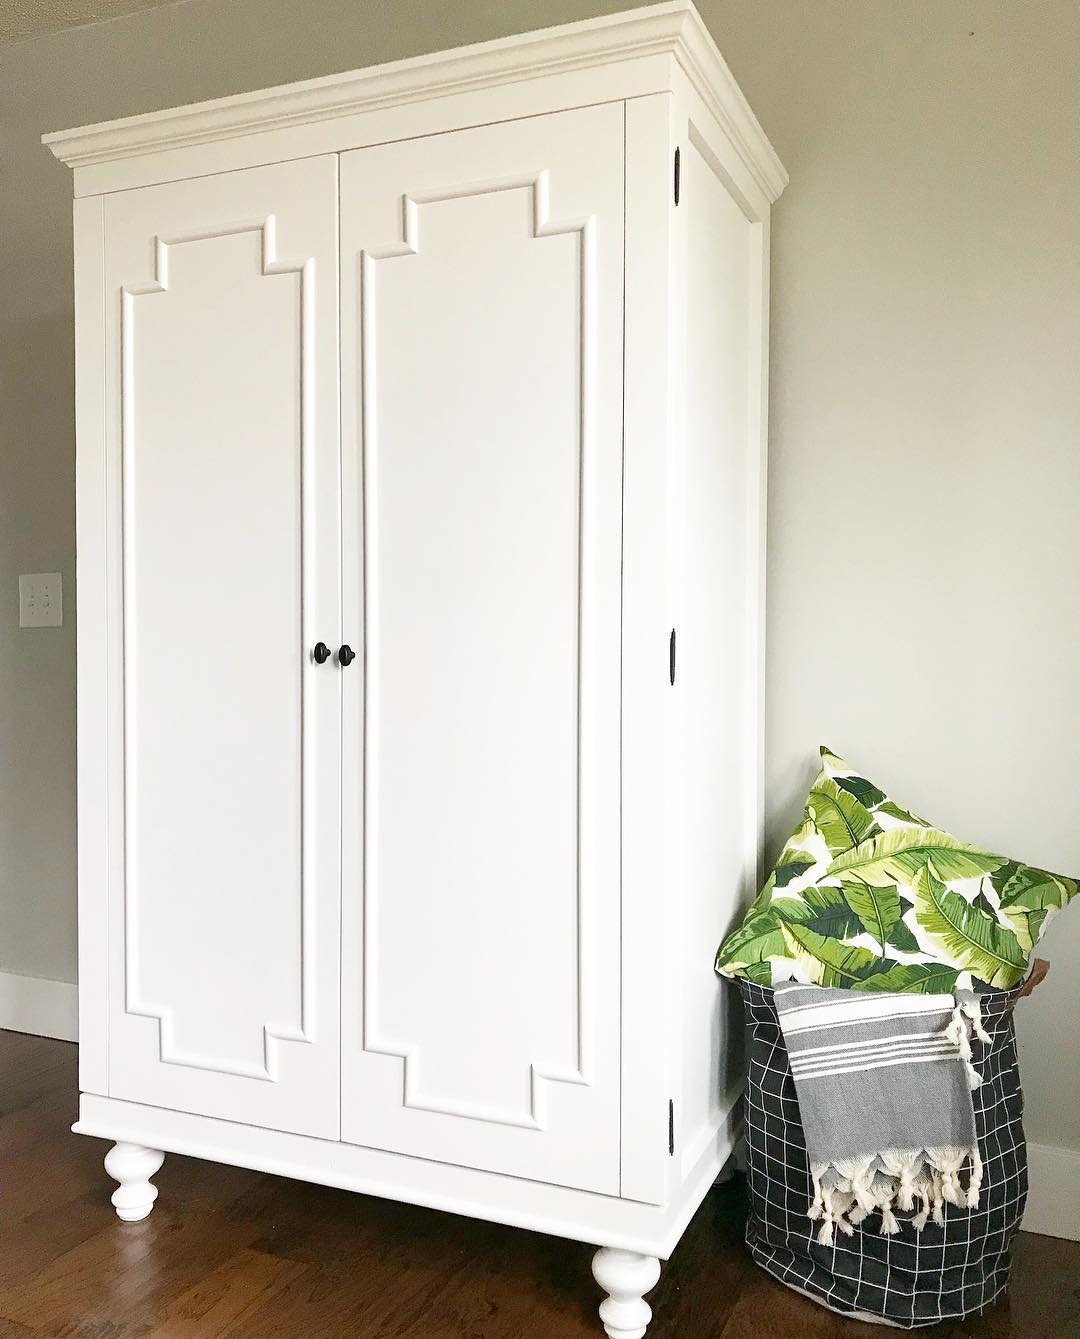 White traditional style standalone wardrobe. Photo by Instagram user @woodshopdiaries